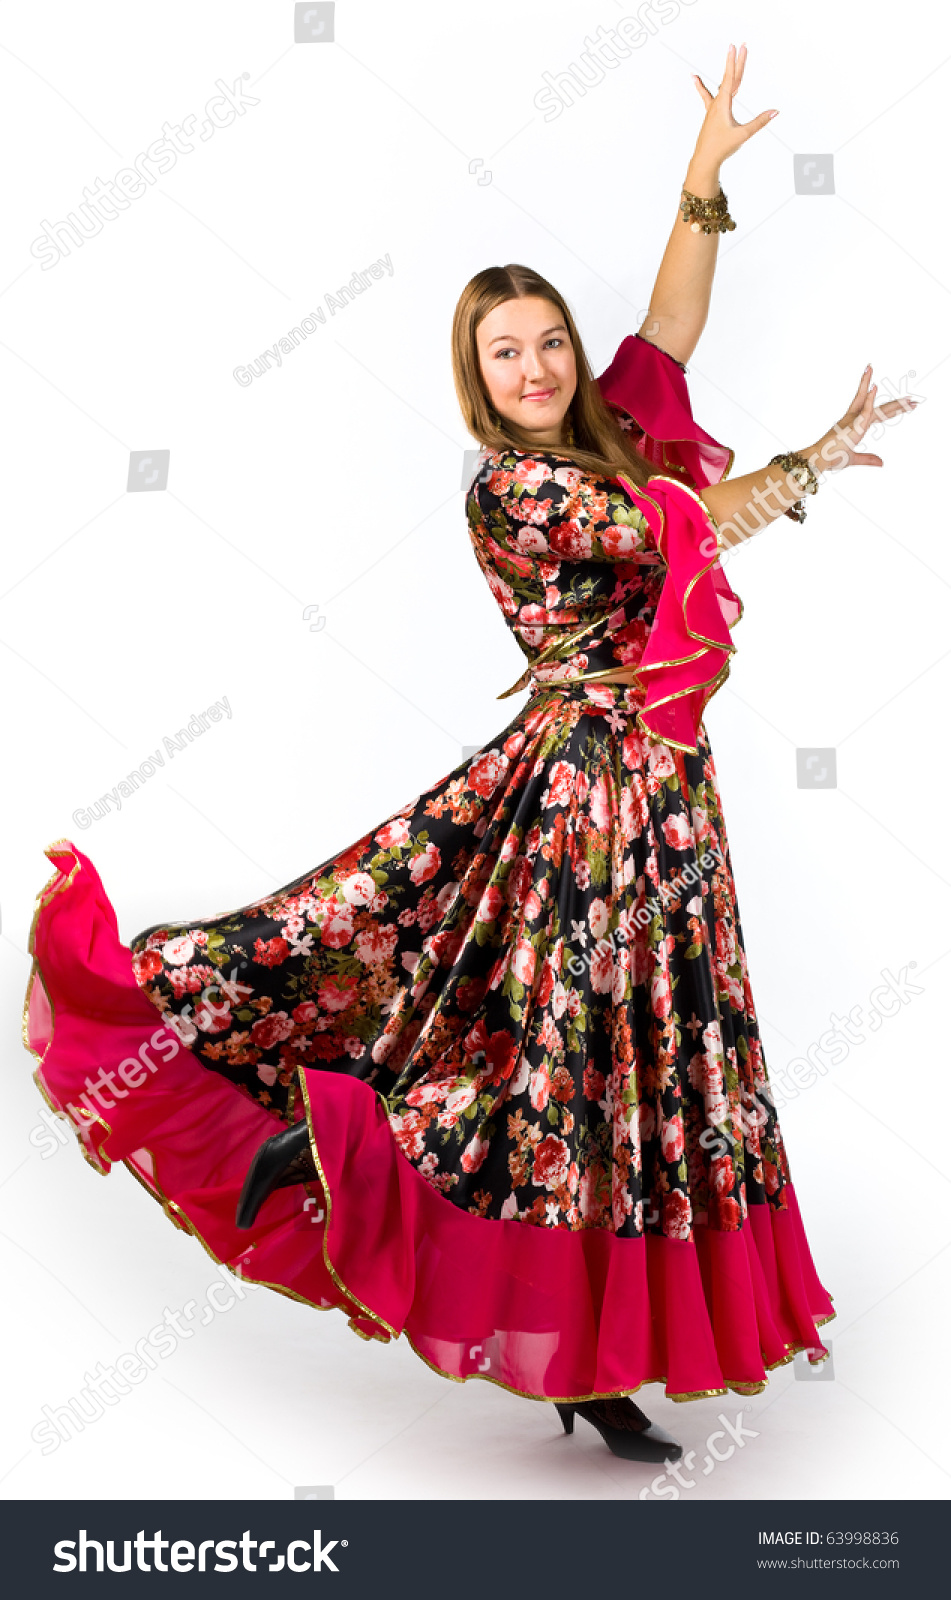 Woman In Traditional Costume - Gipsy Dance Stock Photo 63998836 ...